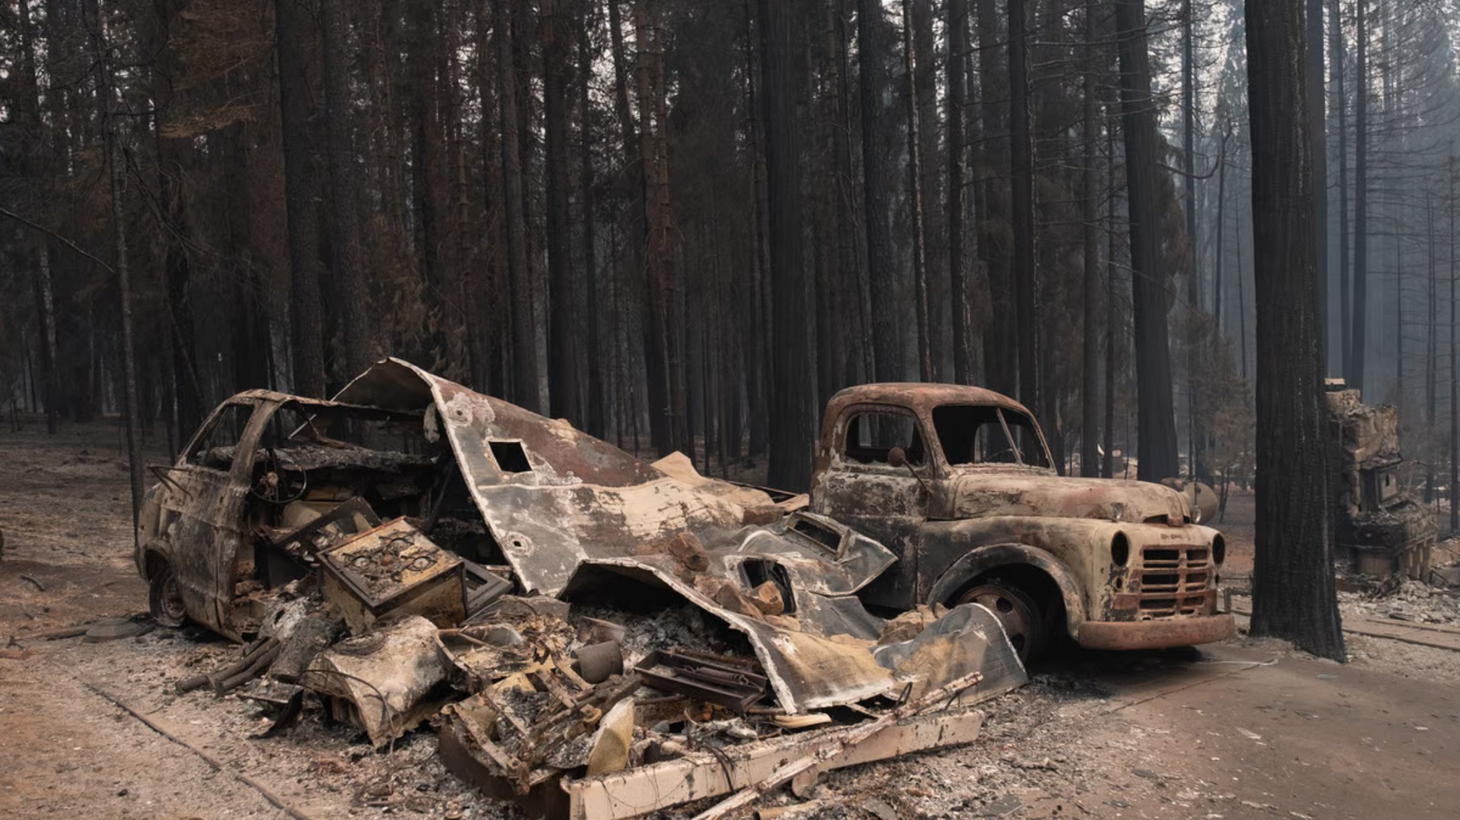 Burned out cars in Grizzly Flats after the Caldor Fire destroyed most of the town. Tuesday, August 17, 2021.